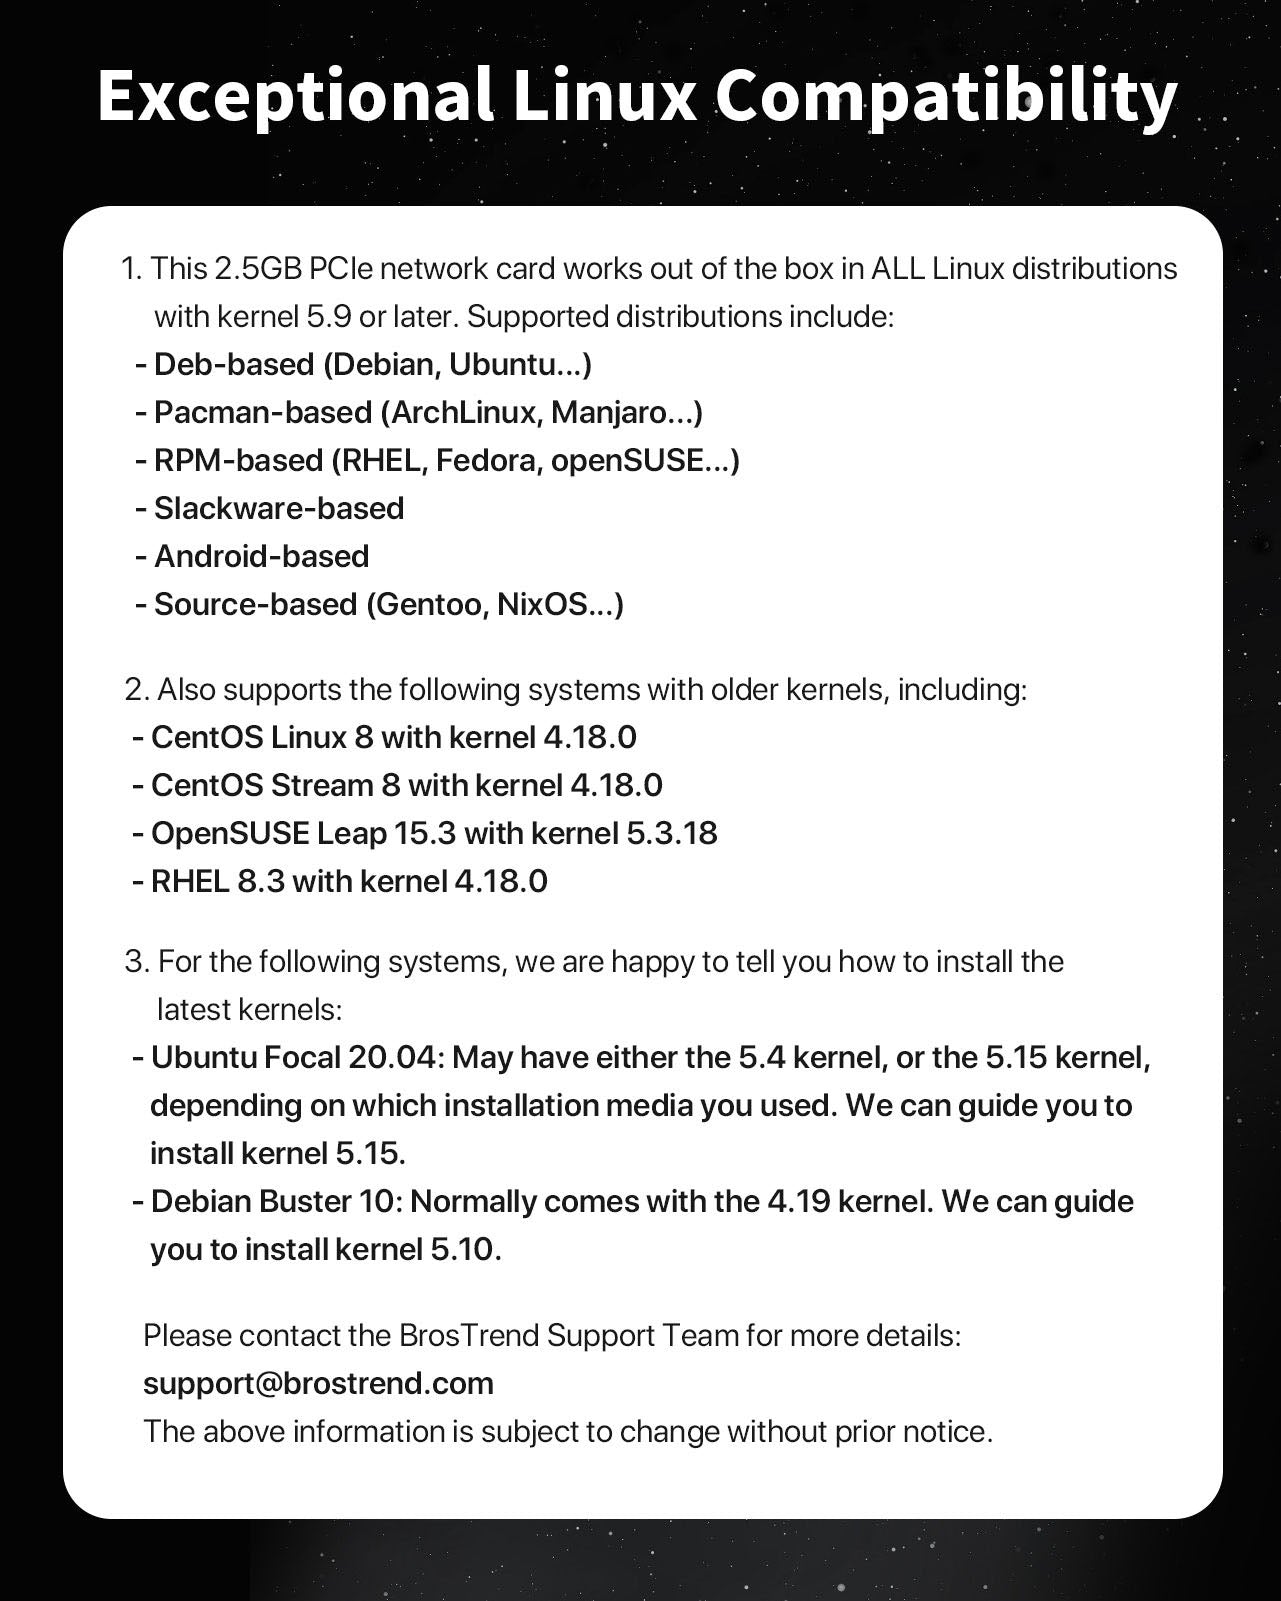 List of Supported Distros for BrosTrend 2.5GB PCIe Network Card Compatible with All Linux Distributions Deb-based Pacman-based RPM-based Slackware-based Android-based Source-based Operating System with Kernel 5.9 Or Later